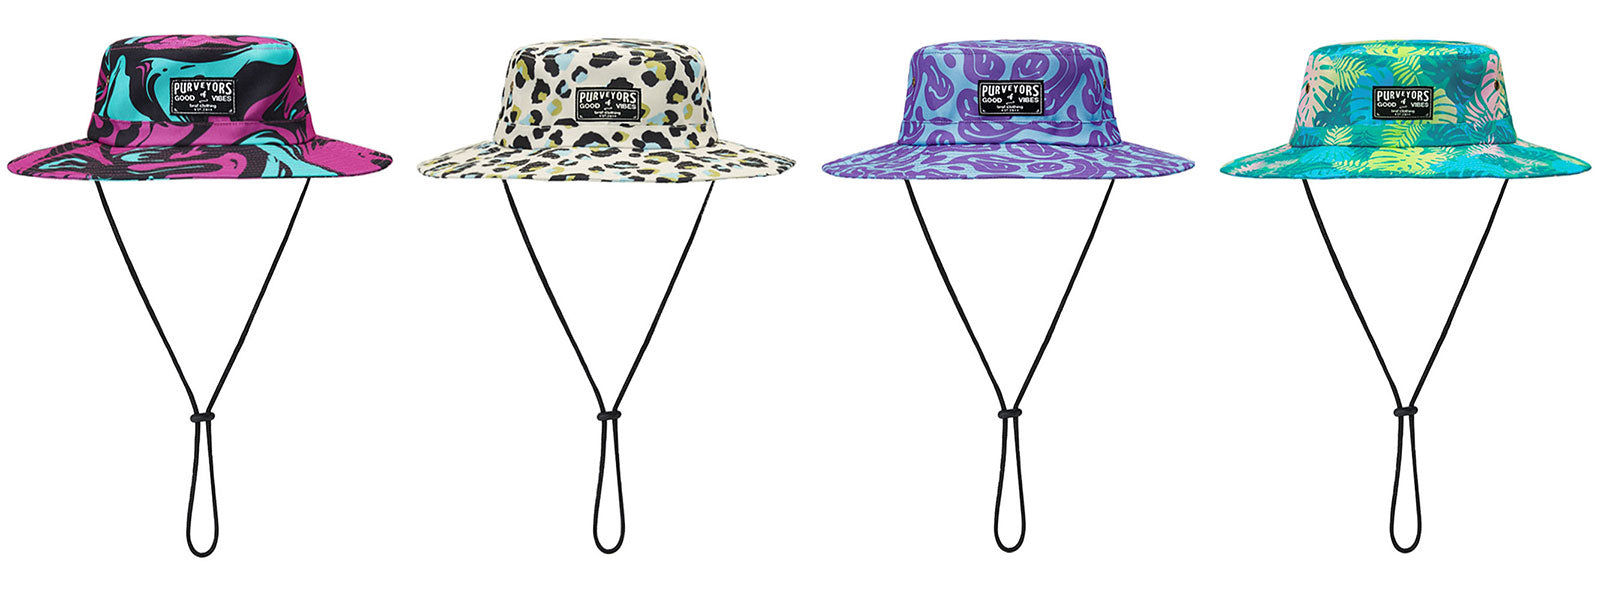 This image shows four bro! printed boonie hats in a row. The designs pictured from left to right are liquid marble print, safari leopard print, happy daze print and tropical print boonie hats. 